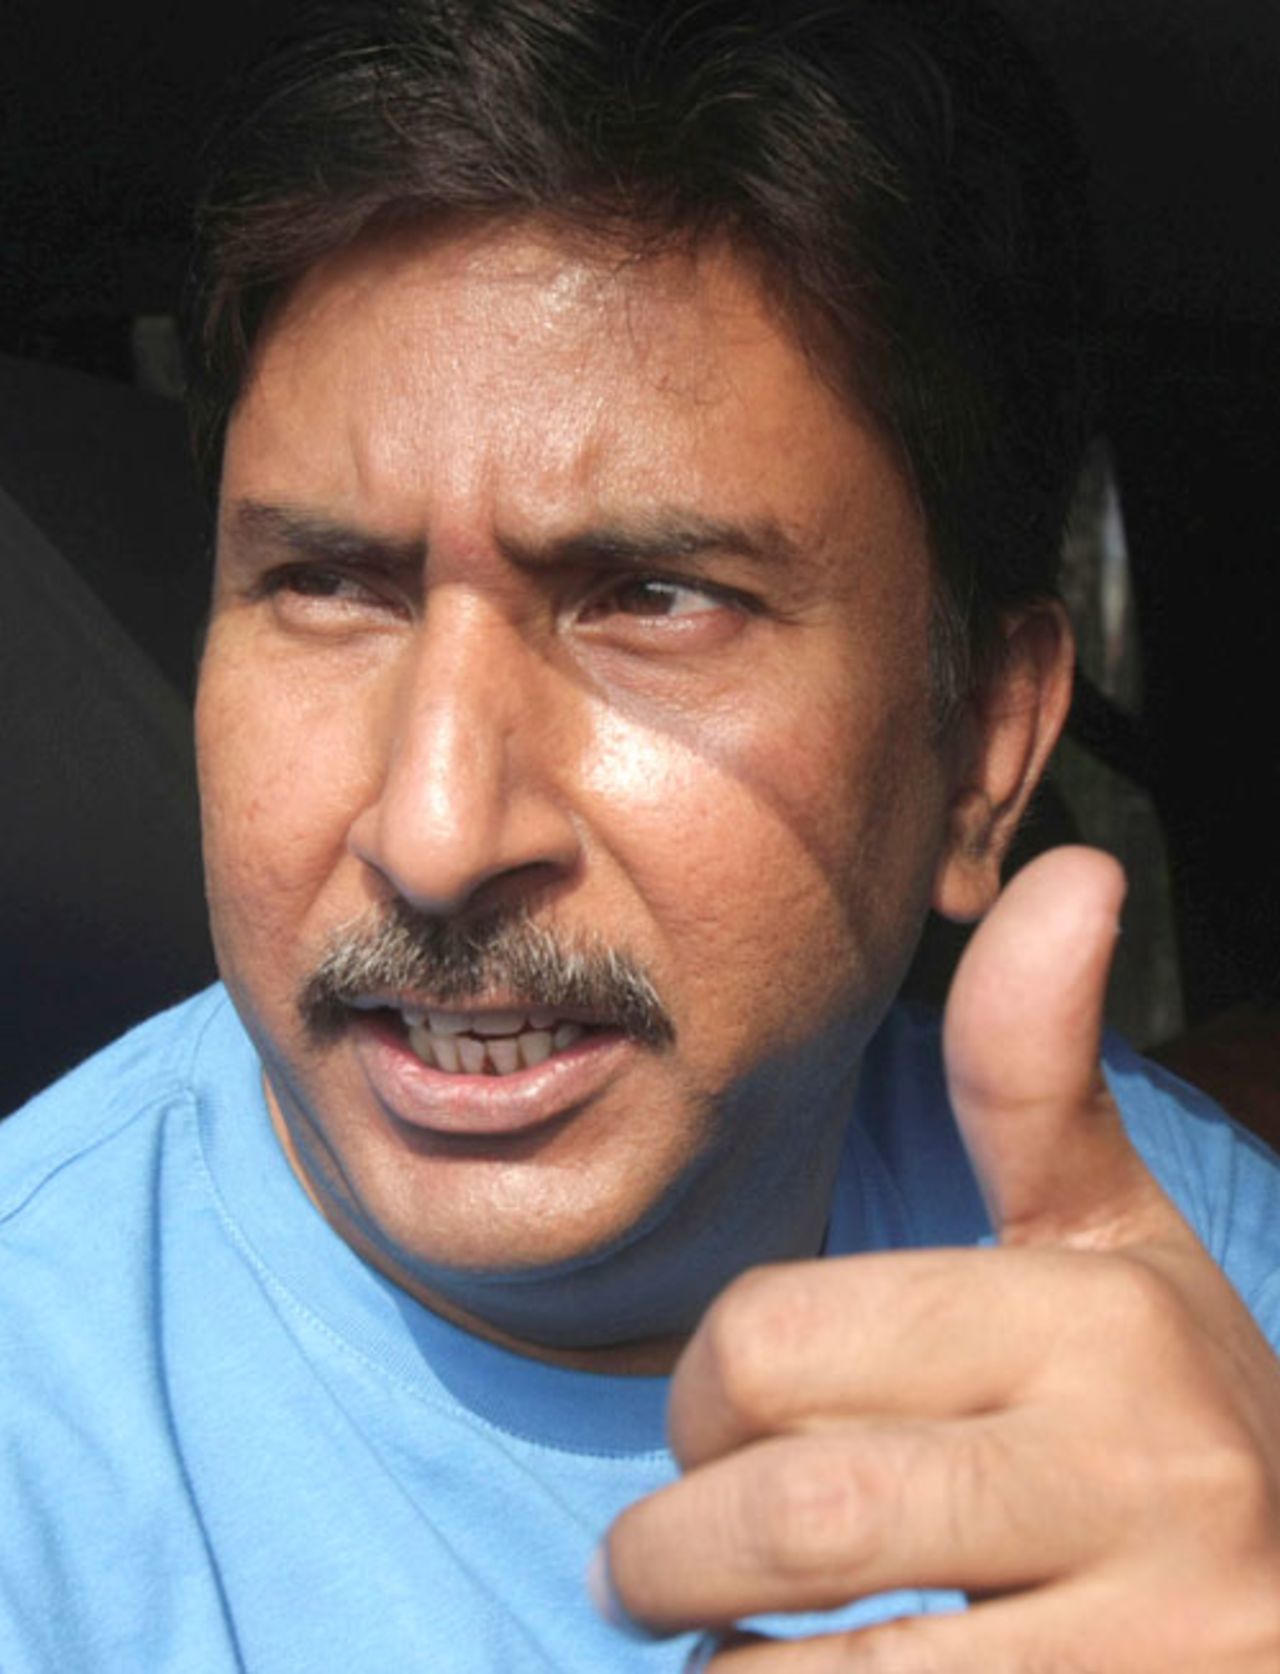 Saleem Malik gives the thumbs up as he leaves court in Lahore following the lifting of his life ban, Lahore, October 23, 2008